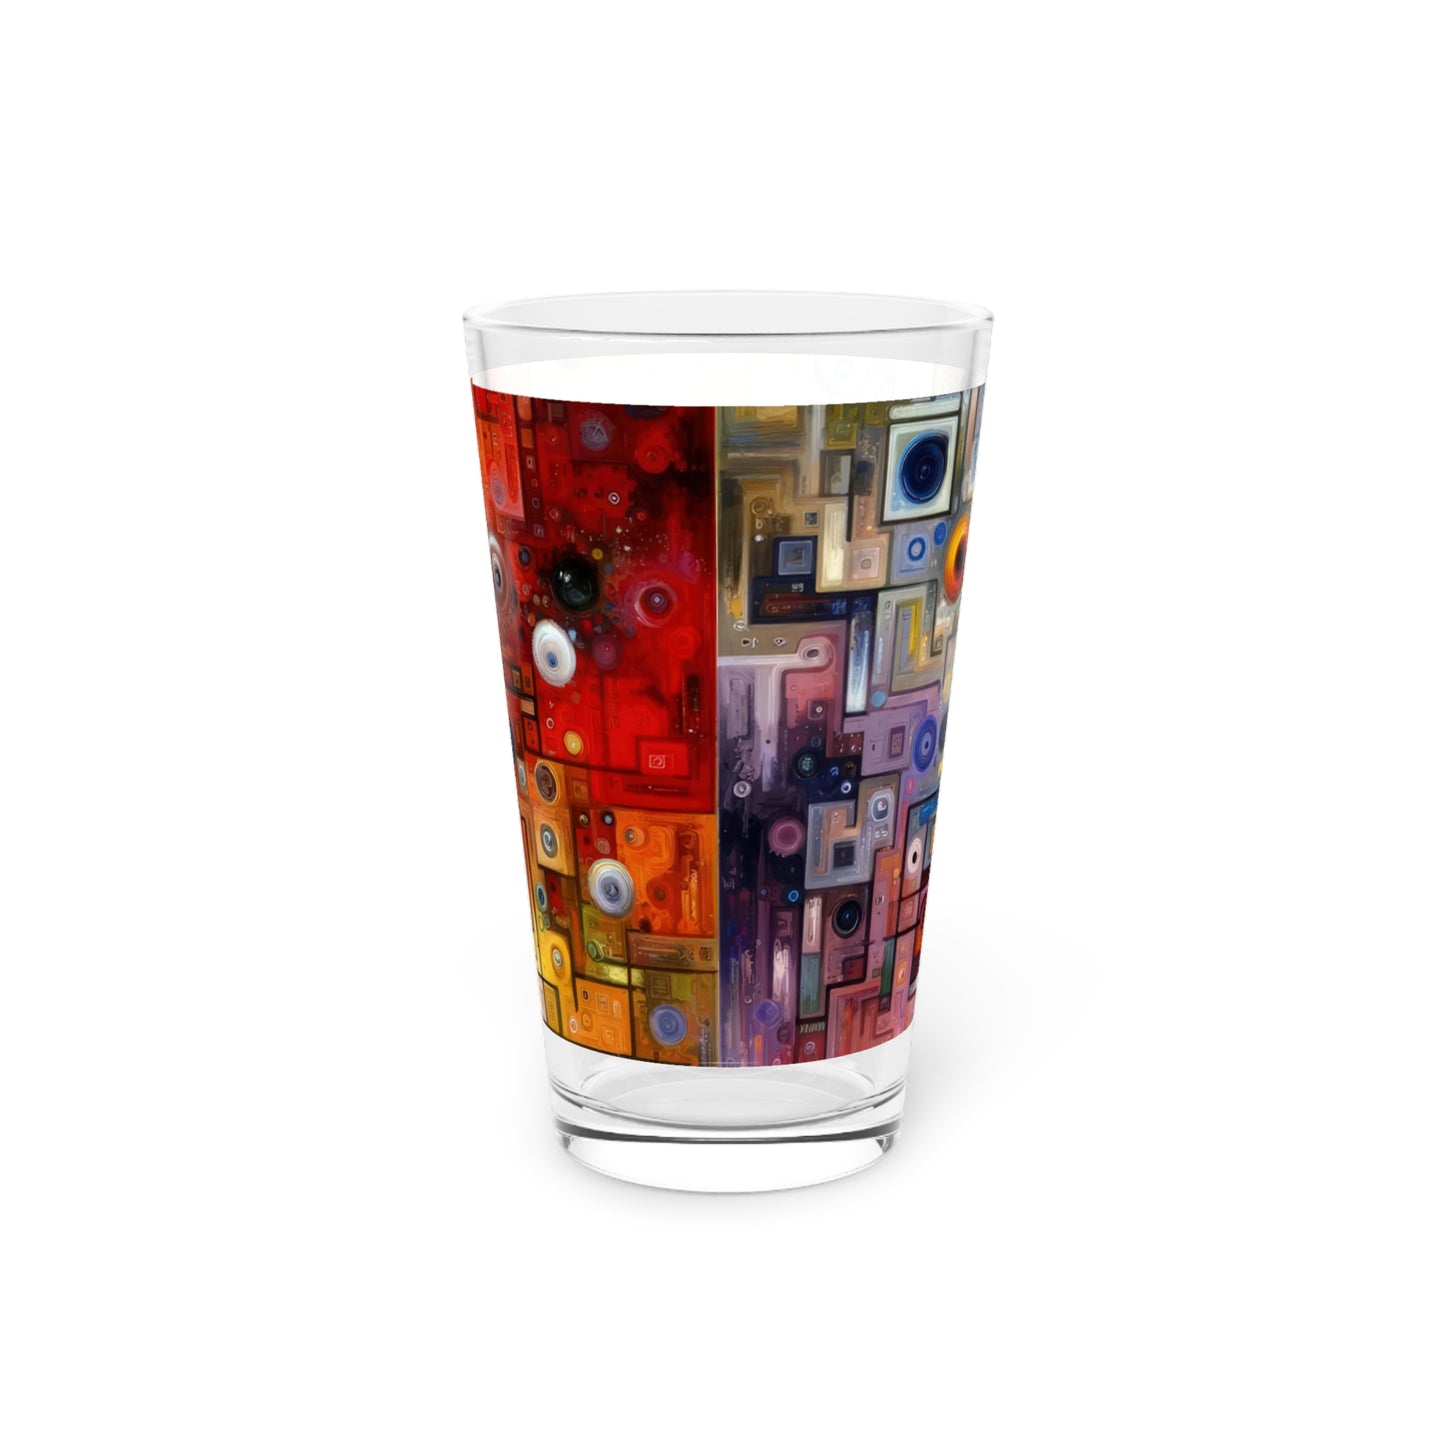 Witty Conversation Tapestry Pint Glass, 16oz